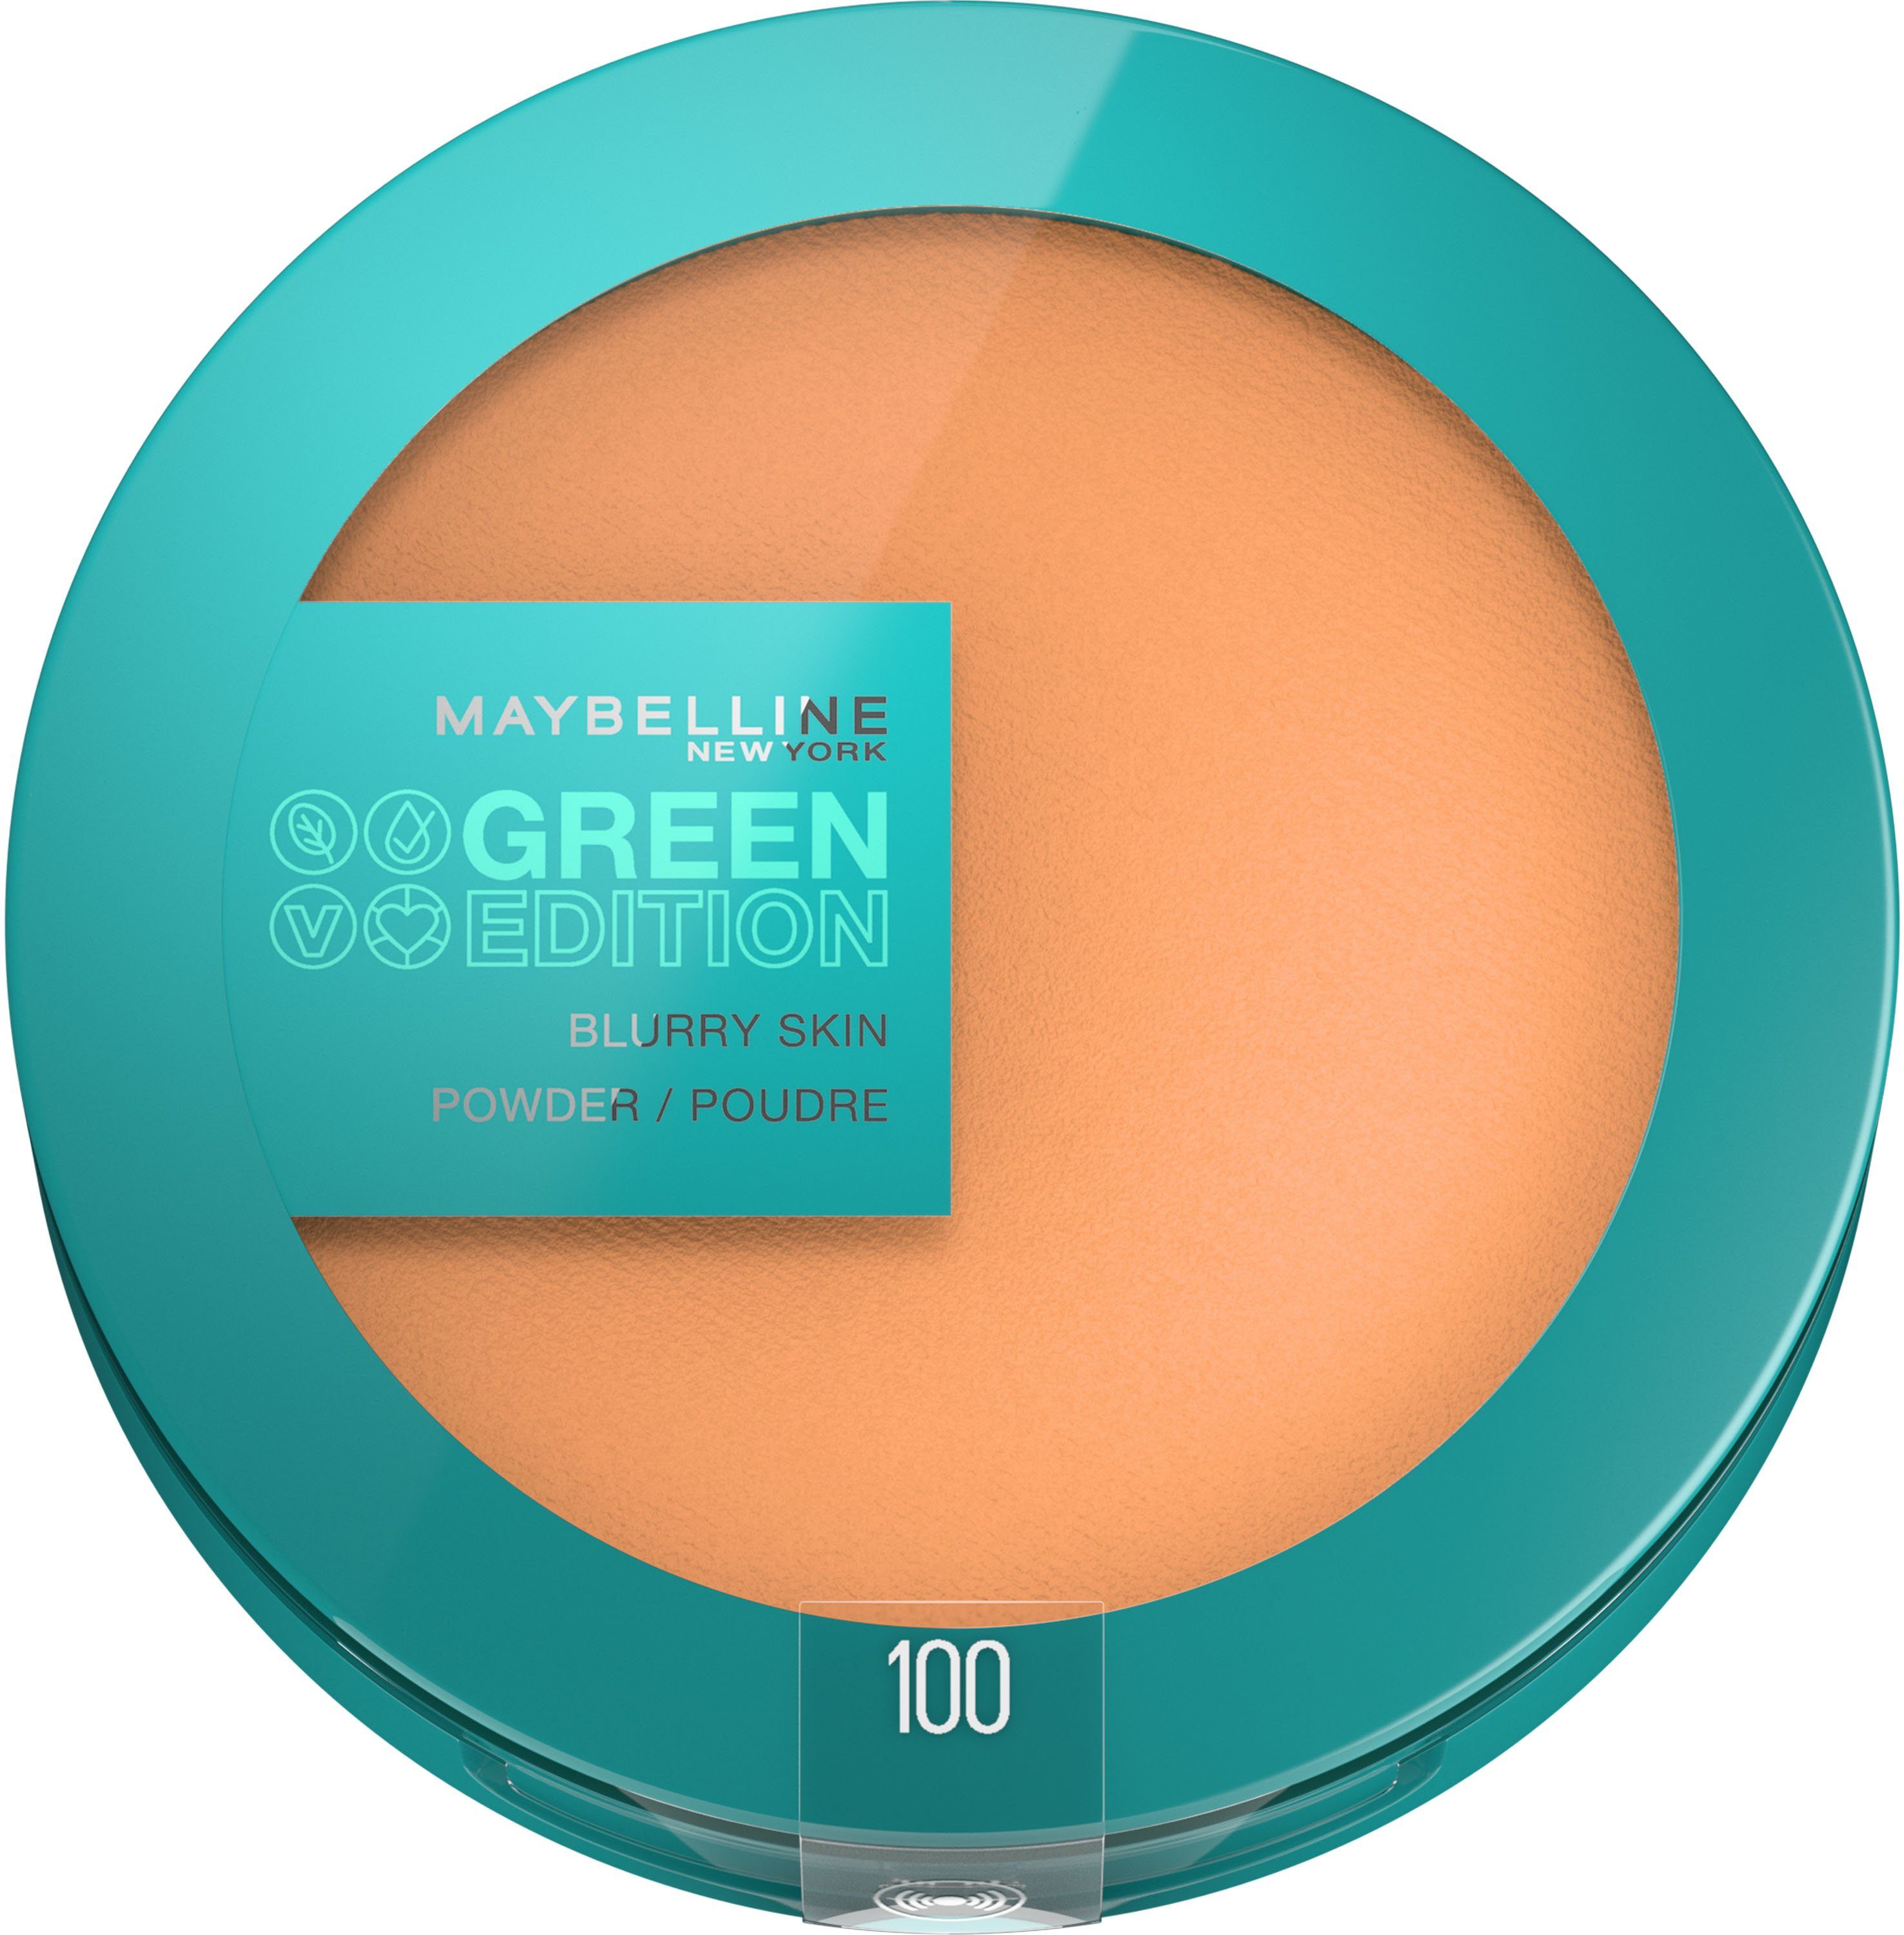 GREEN Puder Edition MAYBELLINE 100 YORK Green ED Puder NEW POWDER